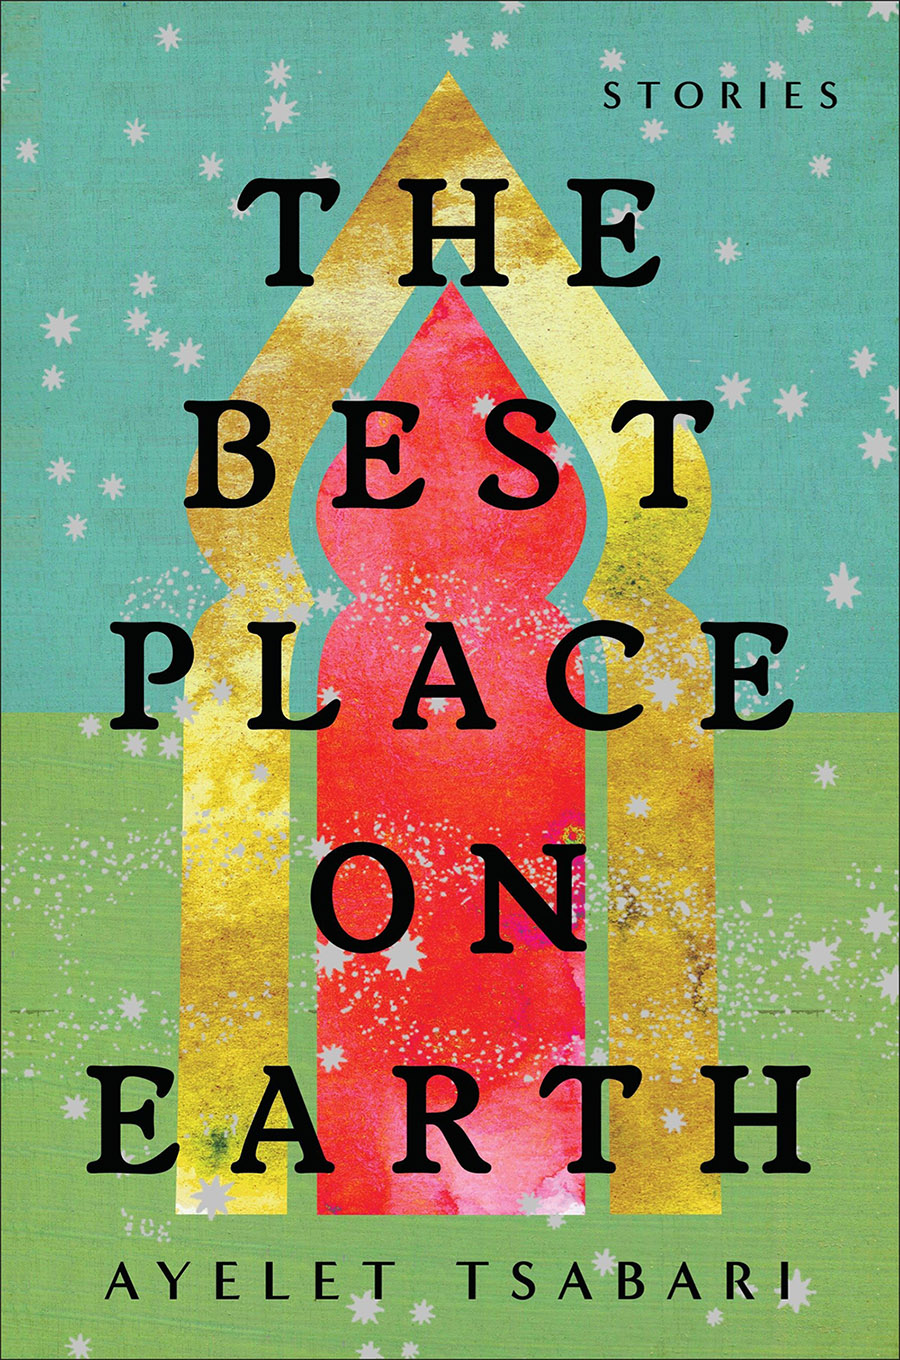 Cover of "The Best Place on Earth," showing an abstract representation of the entryway to a Middle Eastern building in red and gold, on a gold-flecked green background